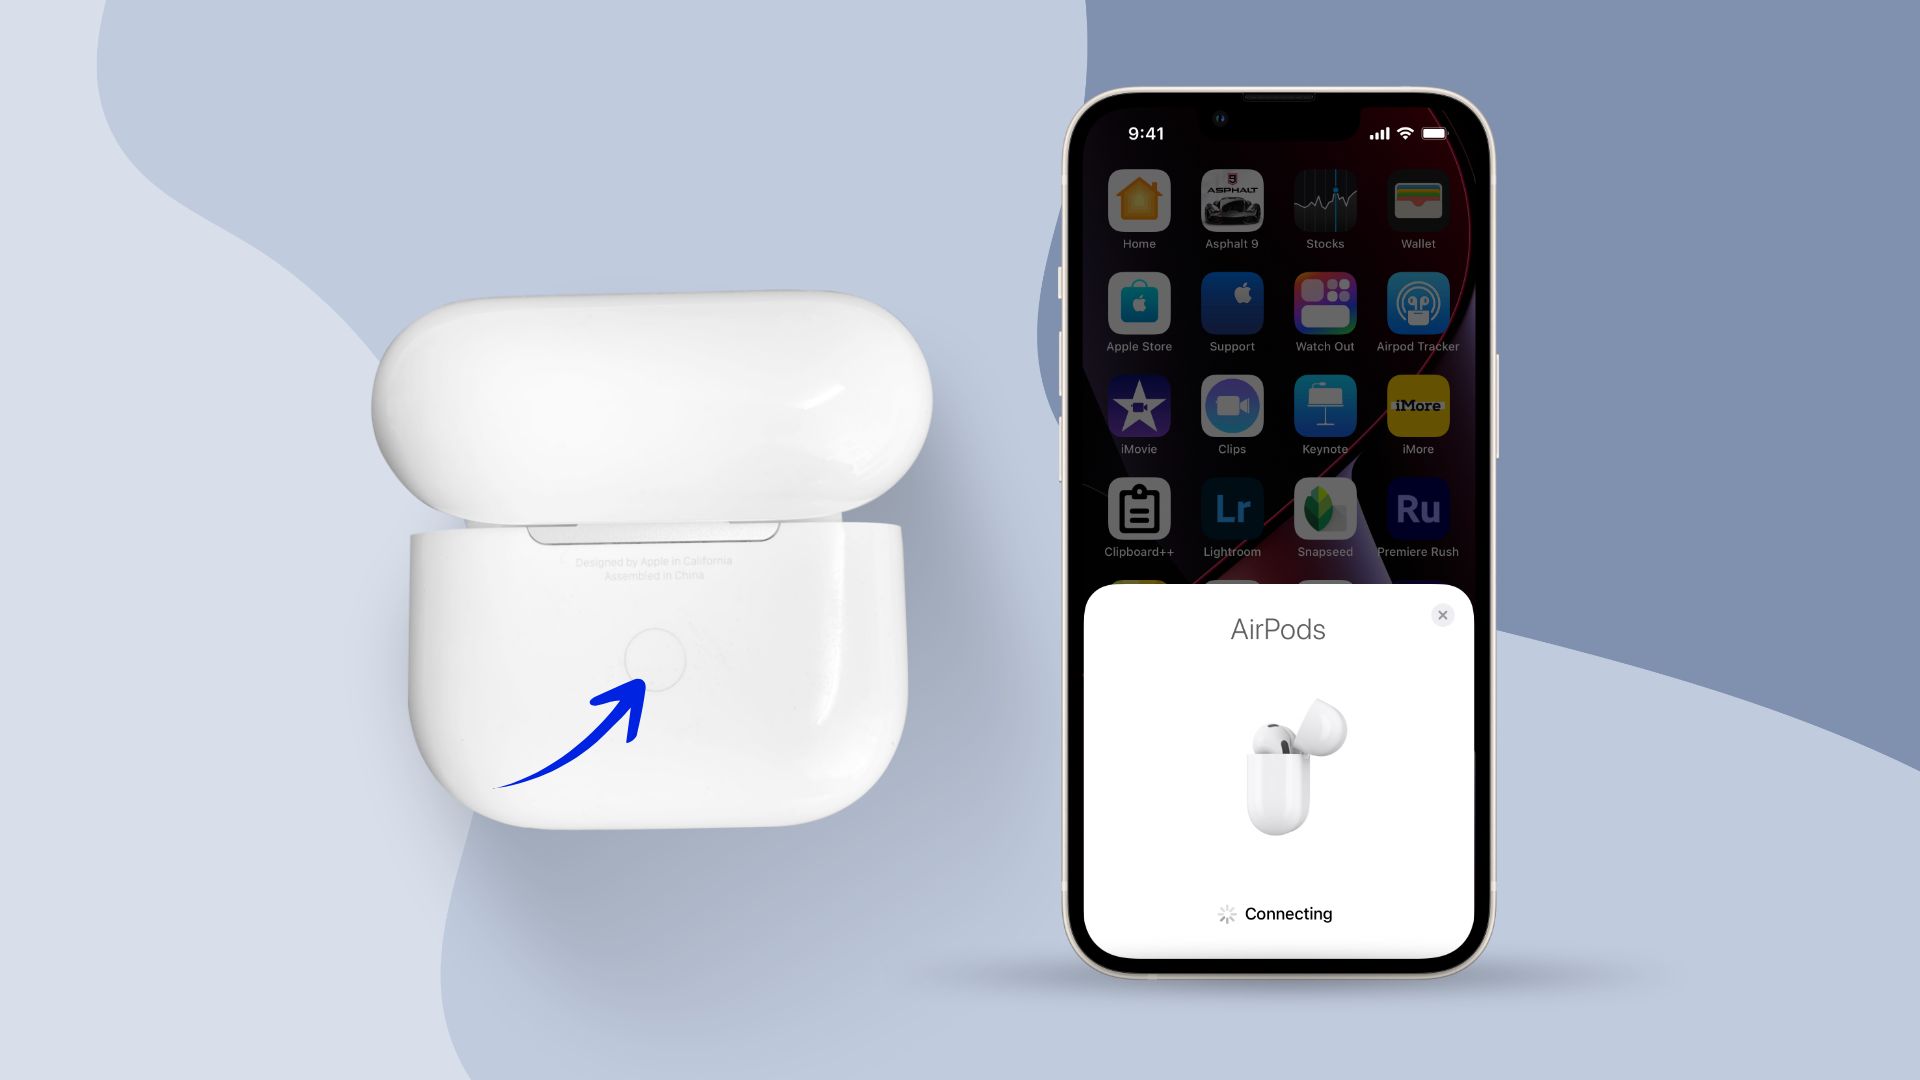 Steps on how to pair AirPods with iPhone or iPad